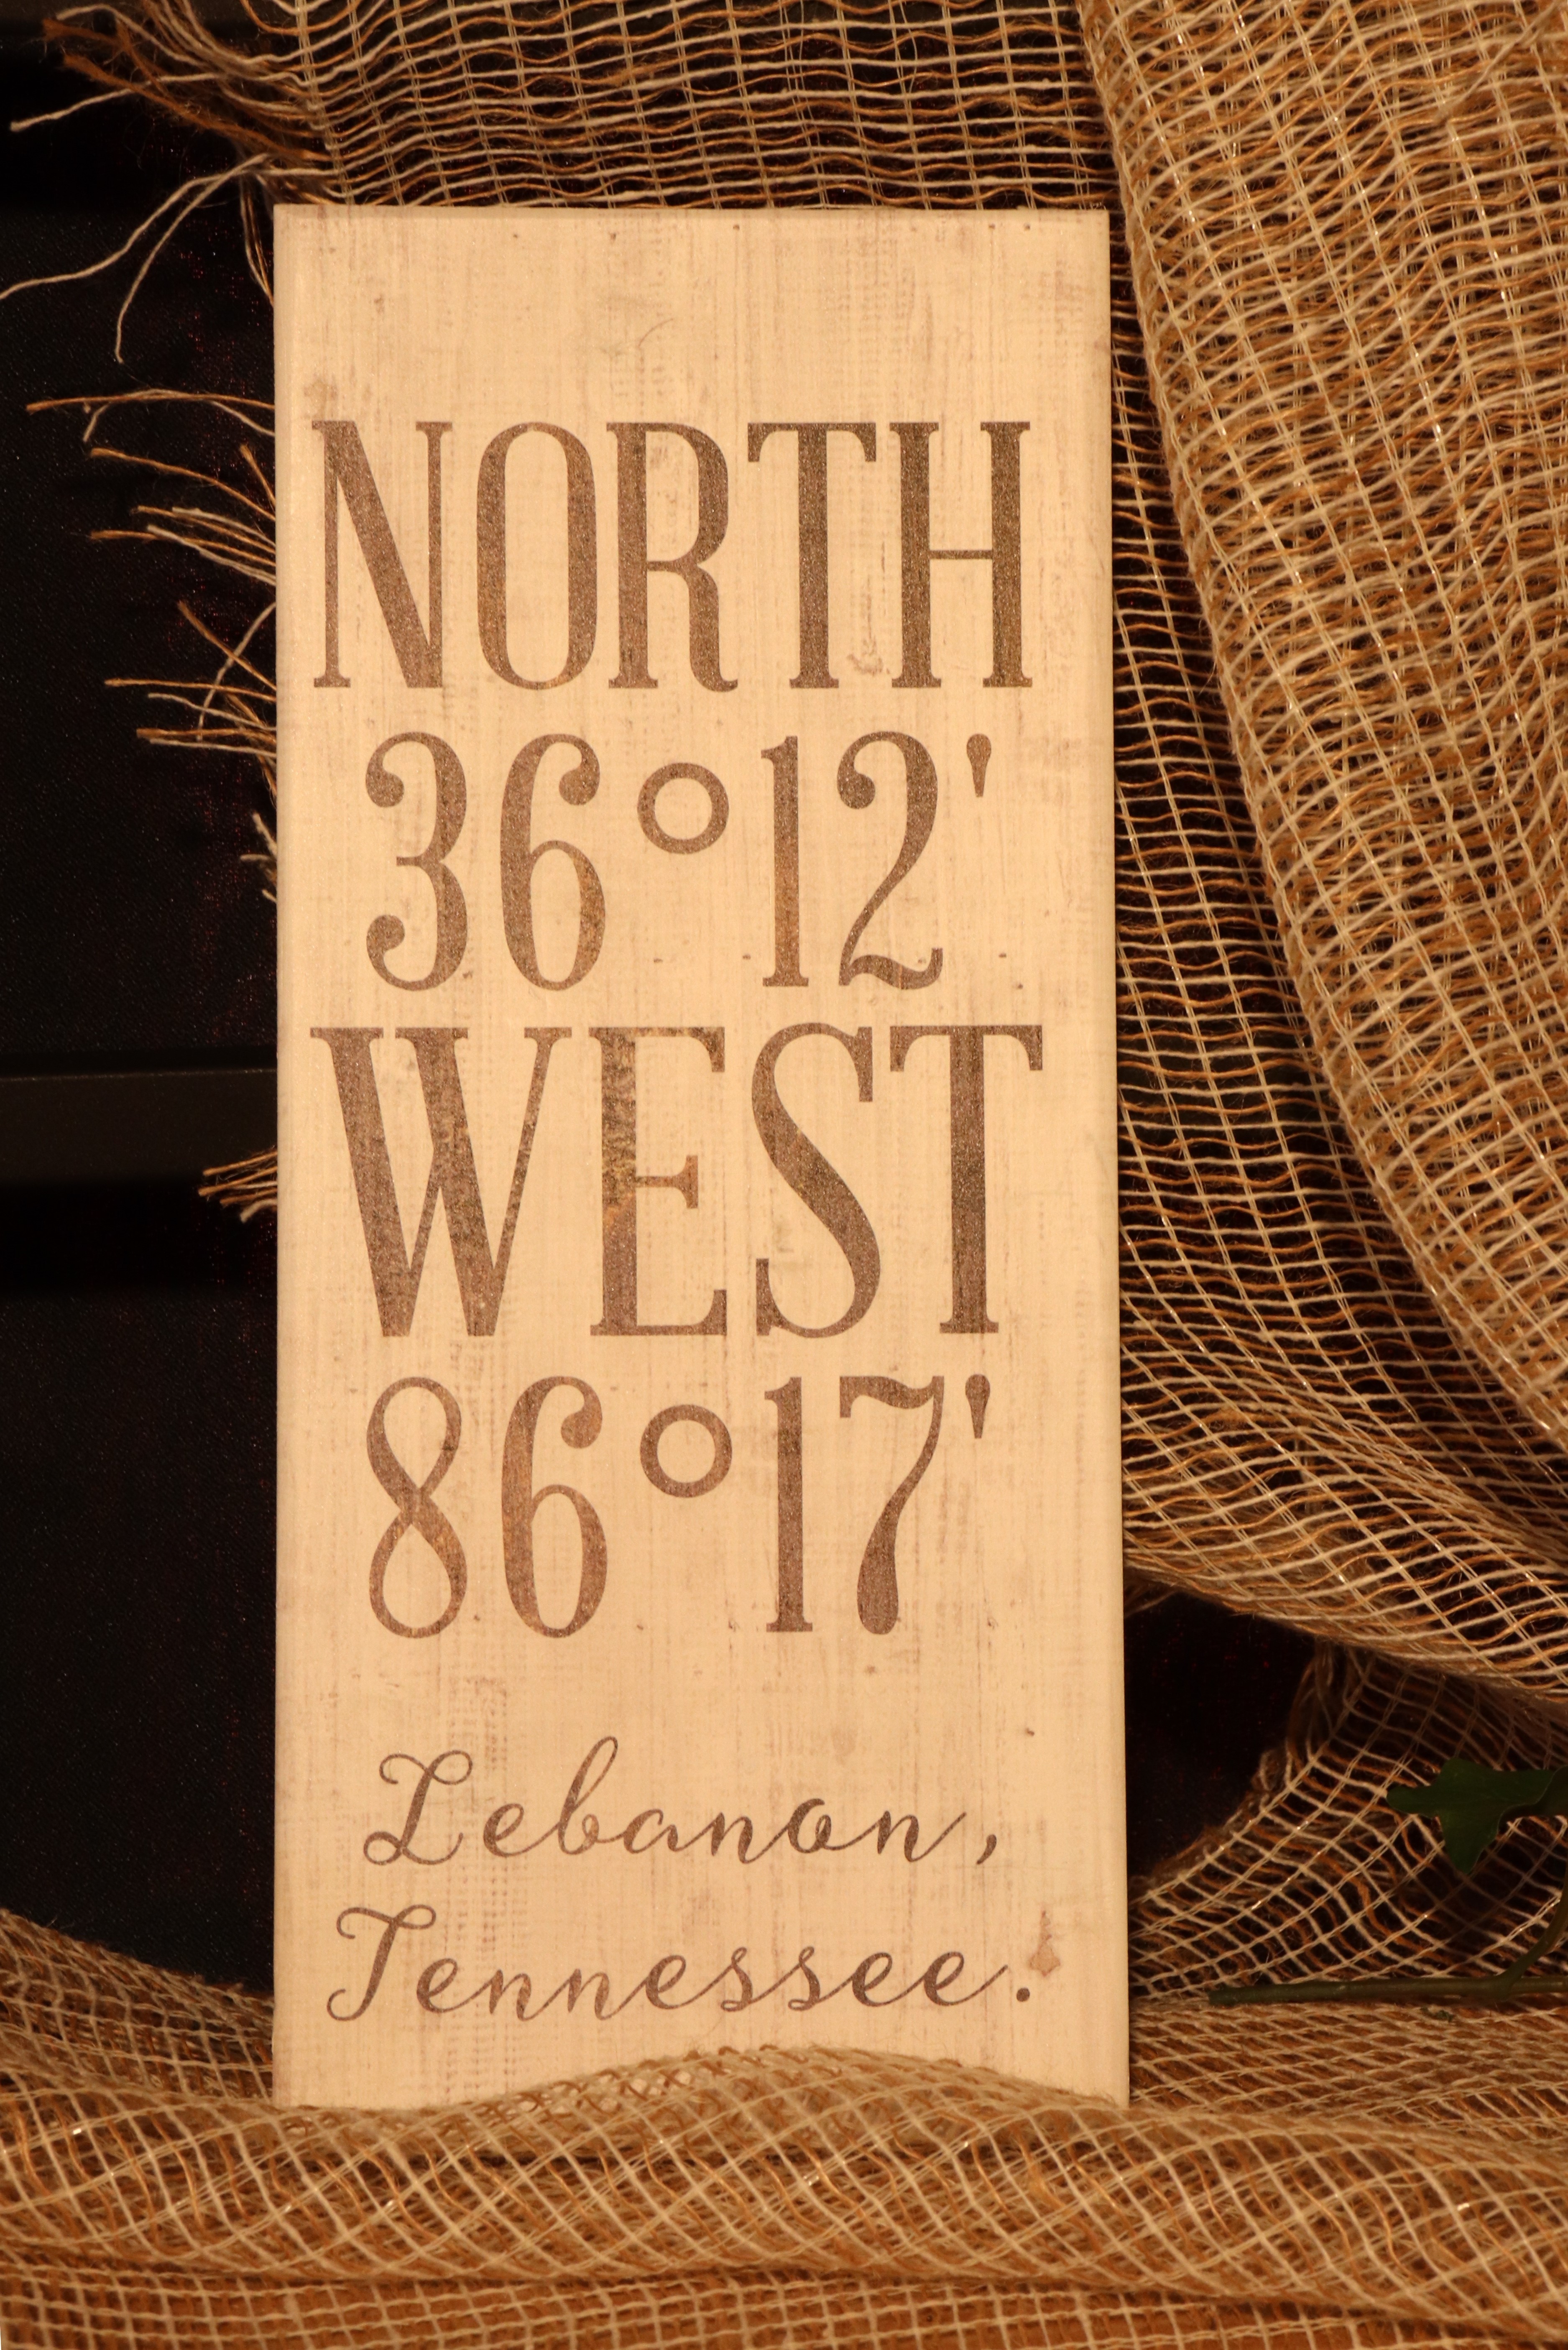 Never forget where you're from! Sunshine Flowers & Gifts Lebanon (615)444-4038